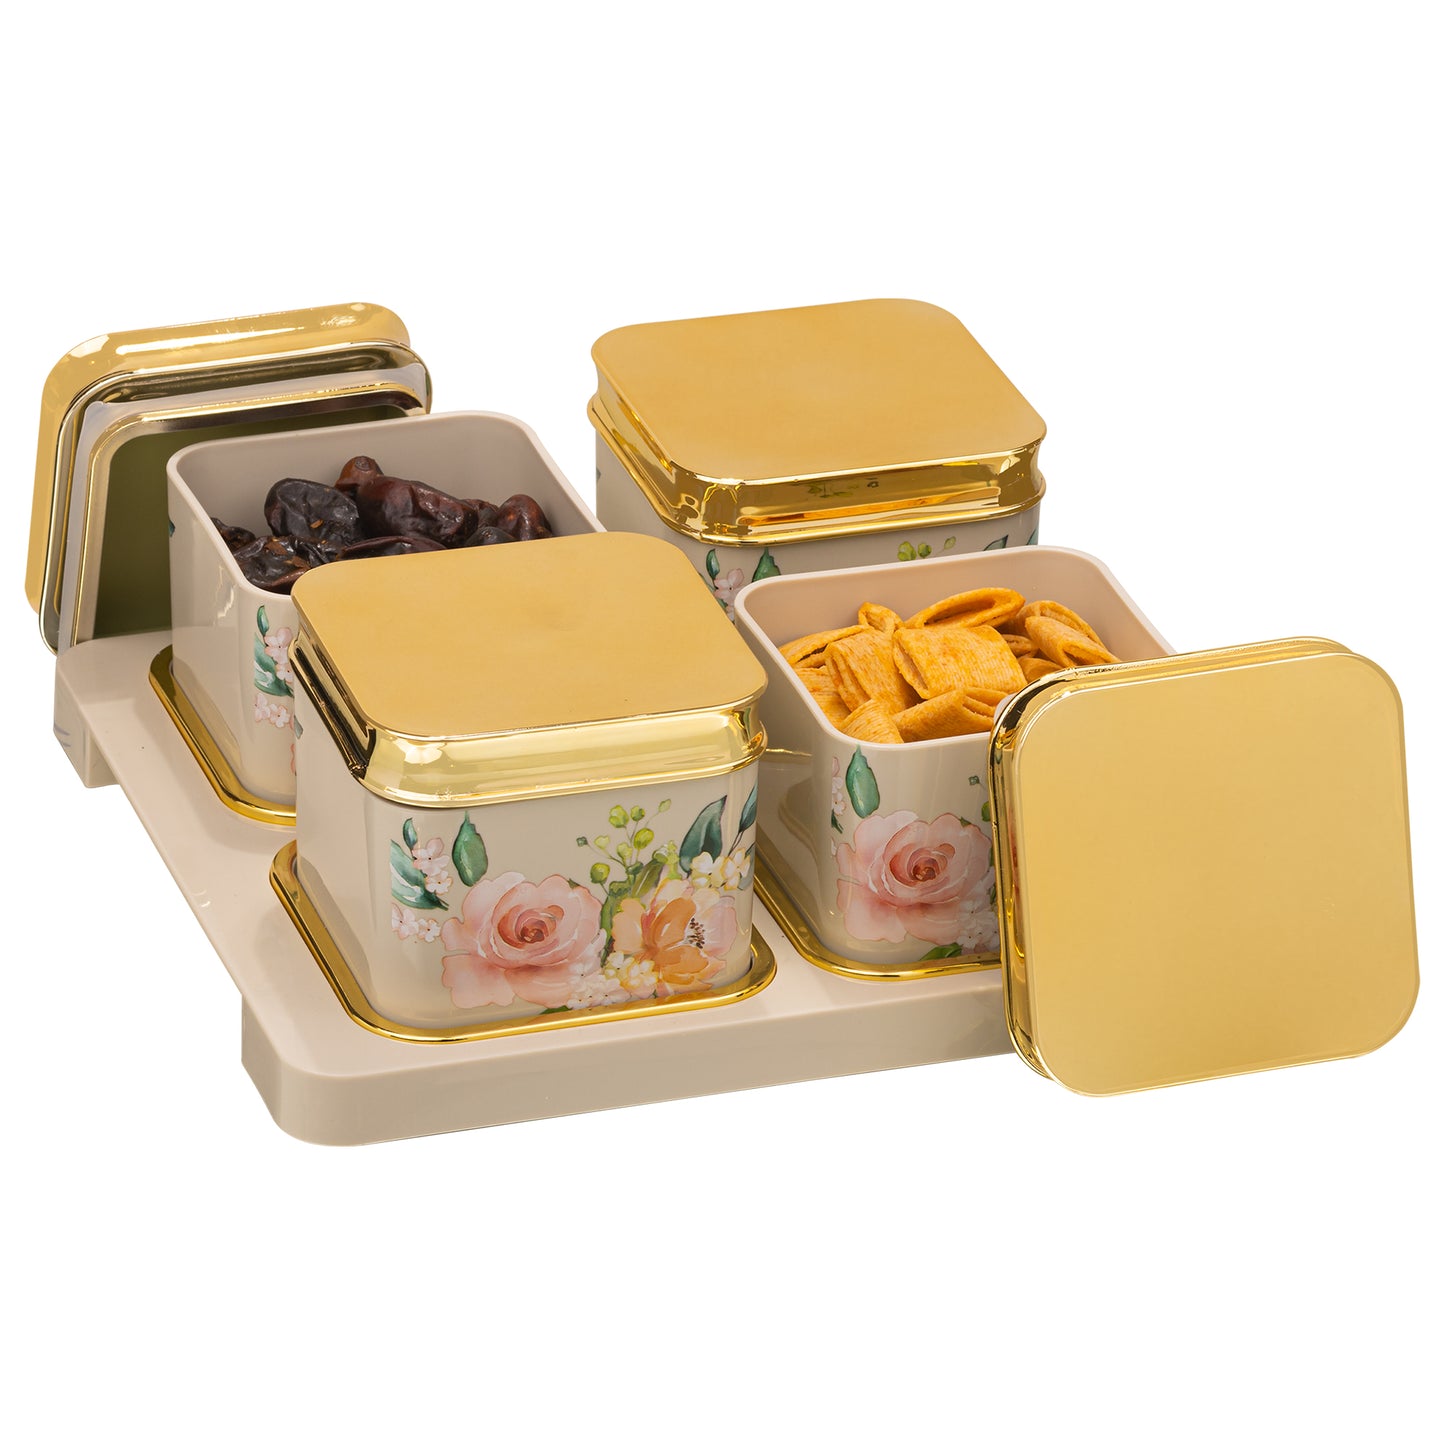 SELVEL Floret Serving Set - 4-Piece Airtight Dry Fruit Container Tray Set (500ml Each) with Lid & Serving Tray